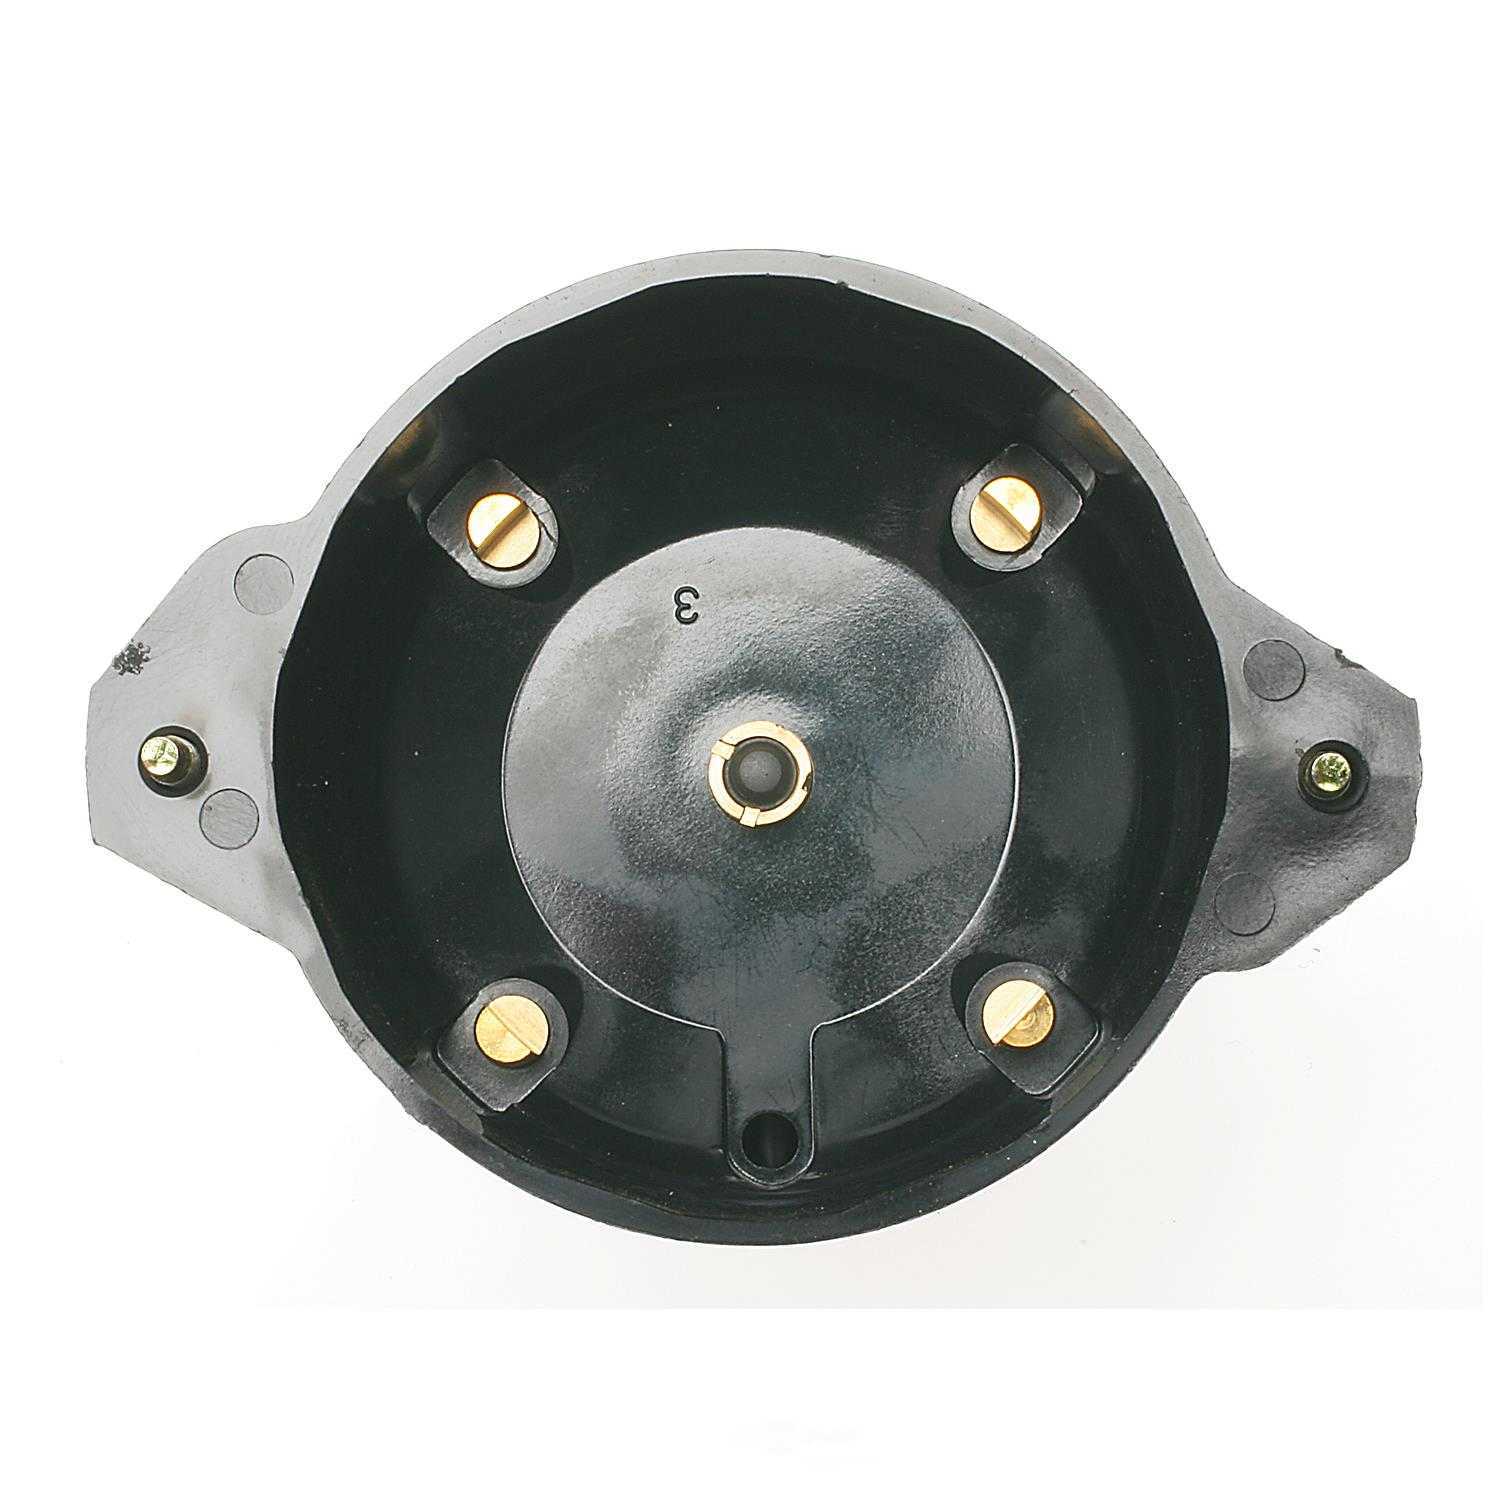 Standard Motor Products JH133 Ignition Cap 